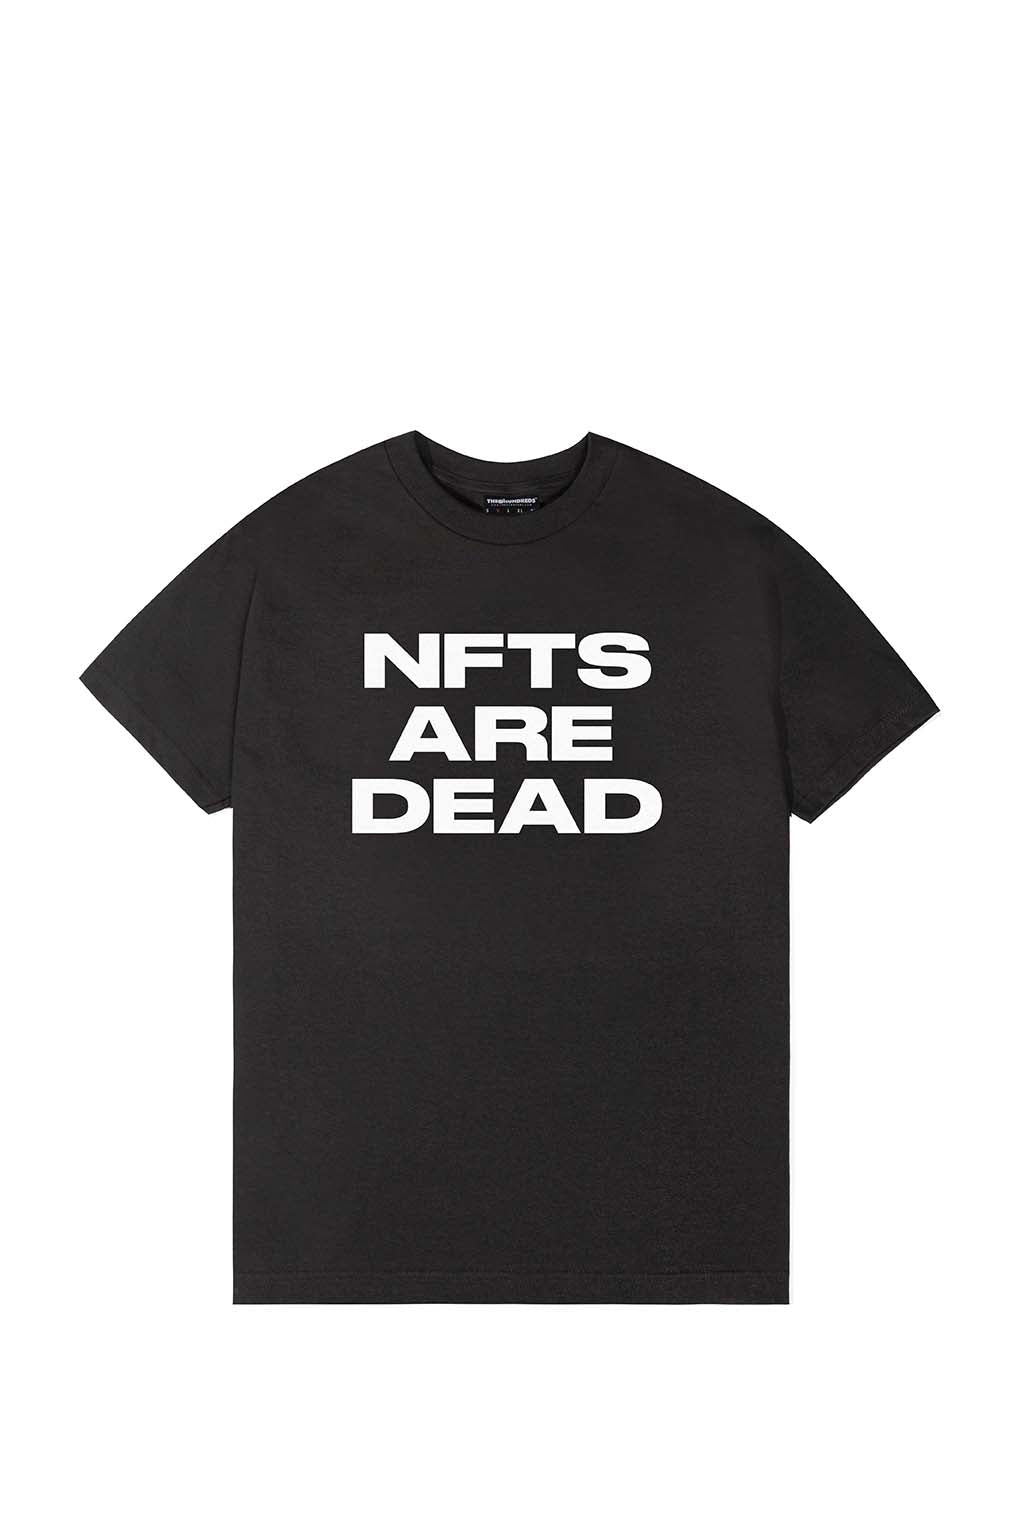 Image of NFTs Are Dead T-Shirt